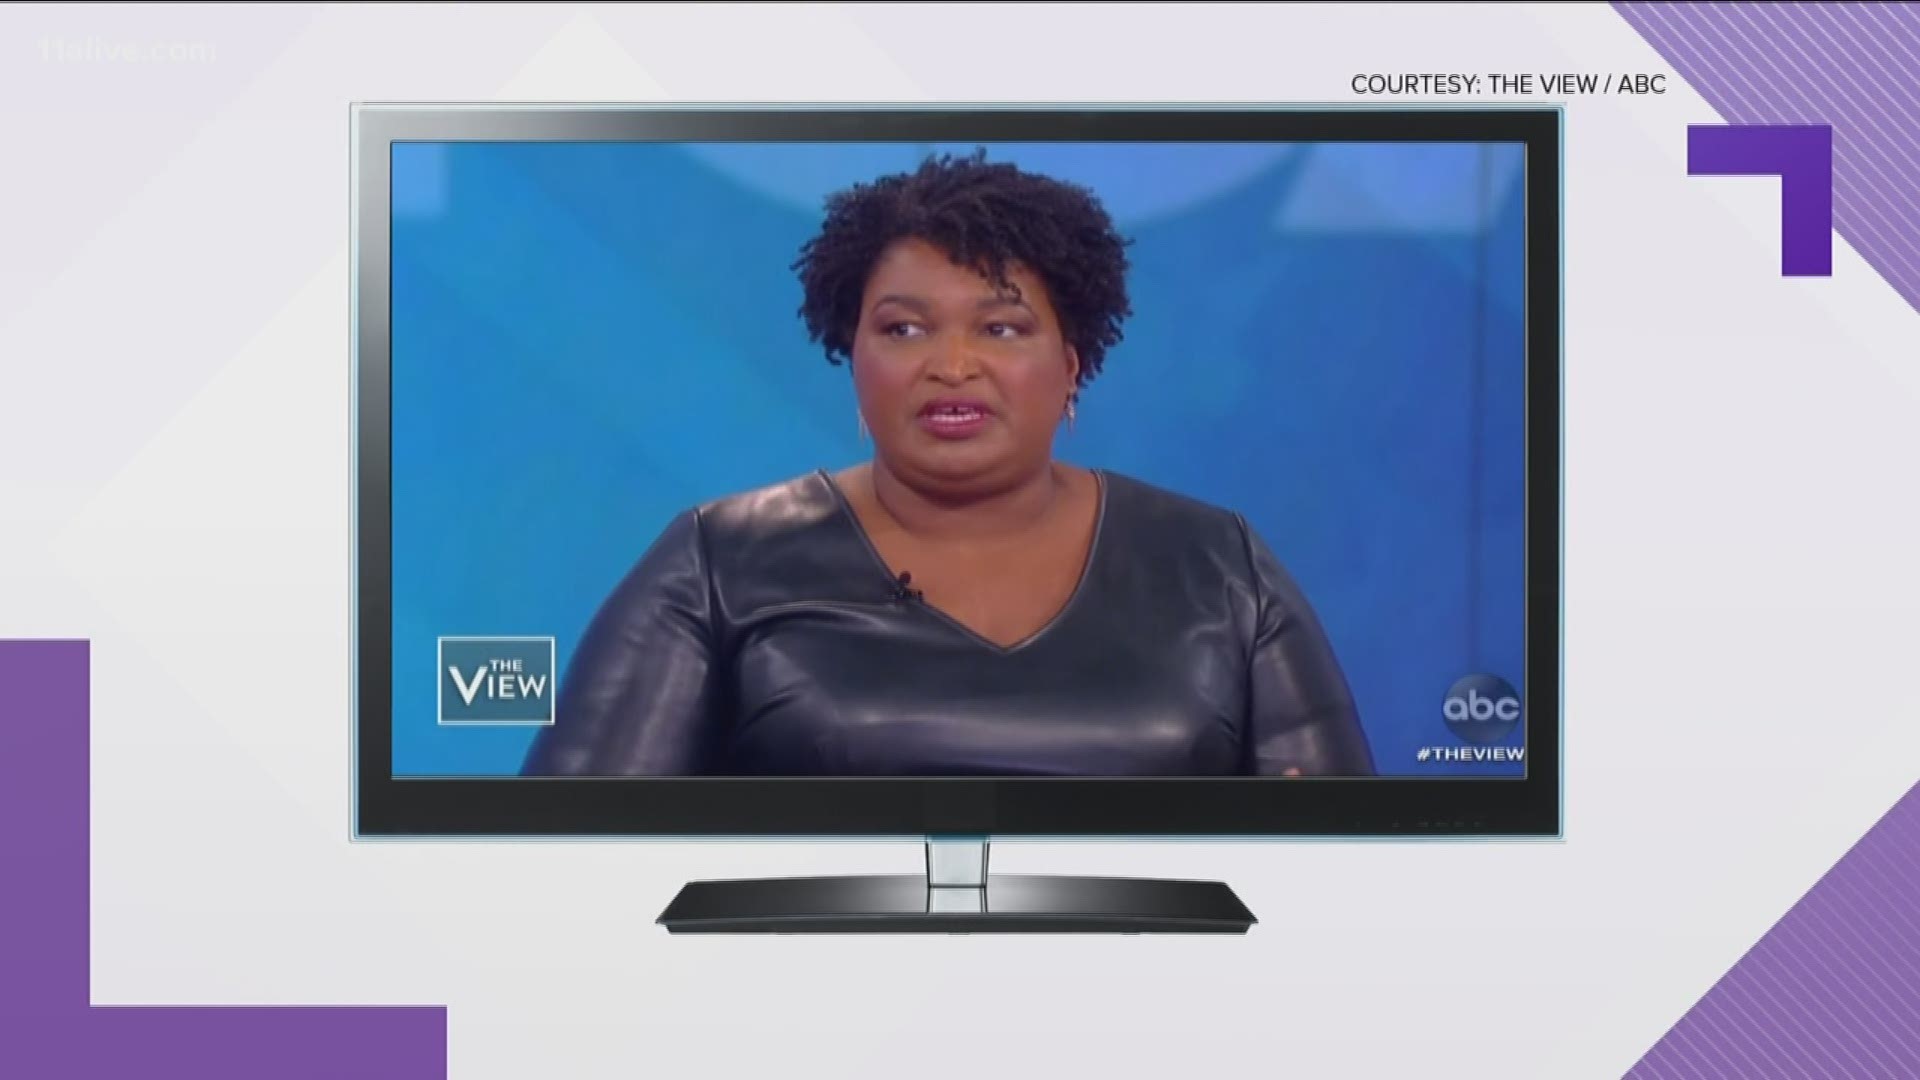 Abrams was on "The View" when she made the comments.